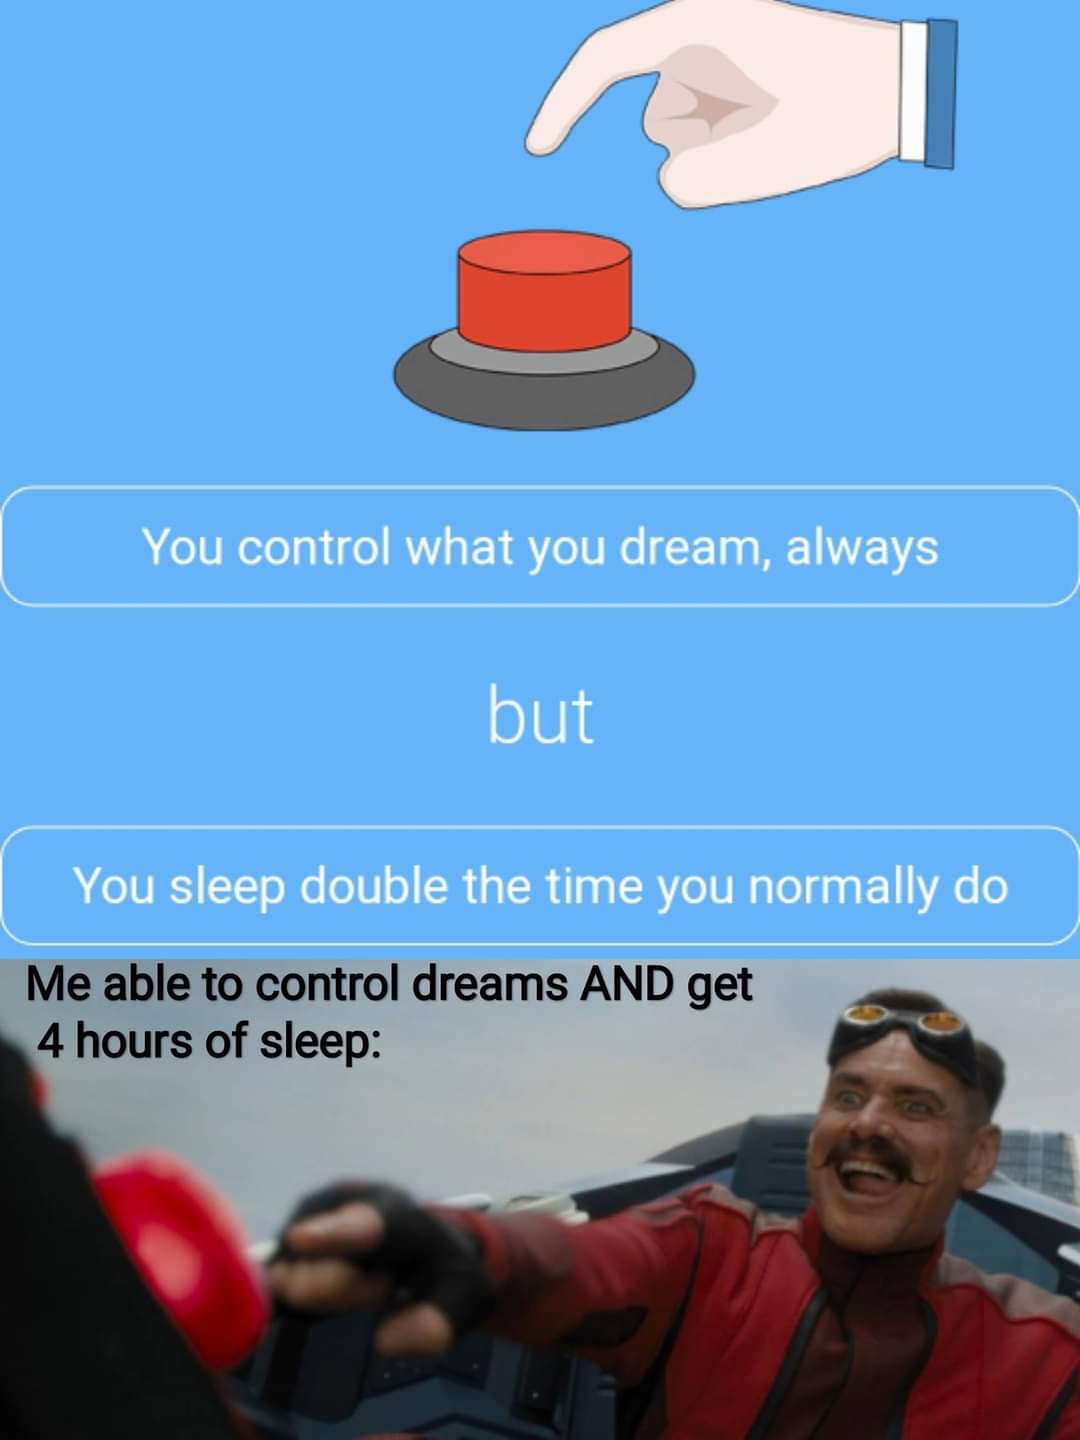 Internet meme - You control what you dream, always but You sleep double the time you normally do Me able to control dreams And get 4 hours of sleep